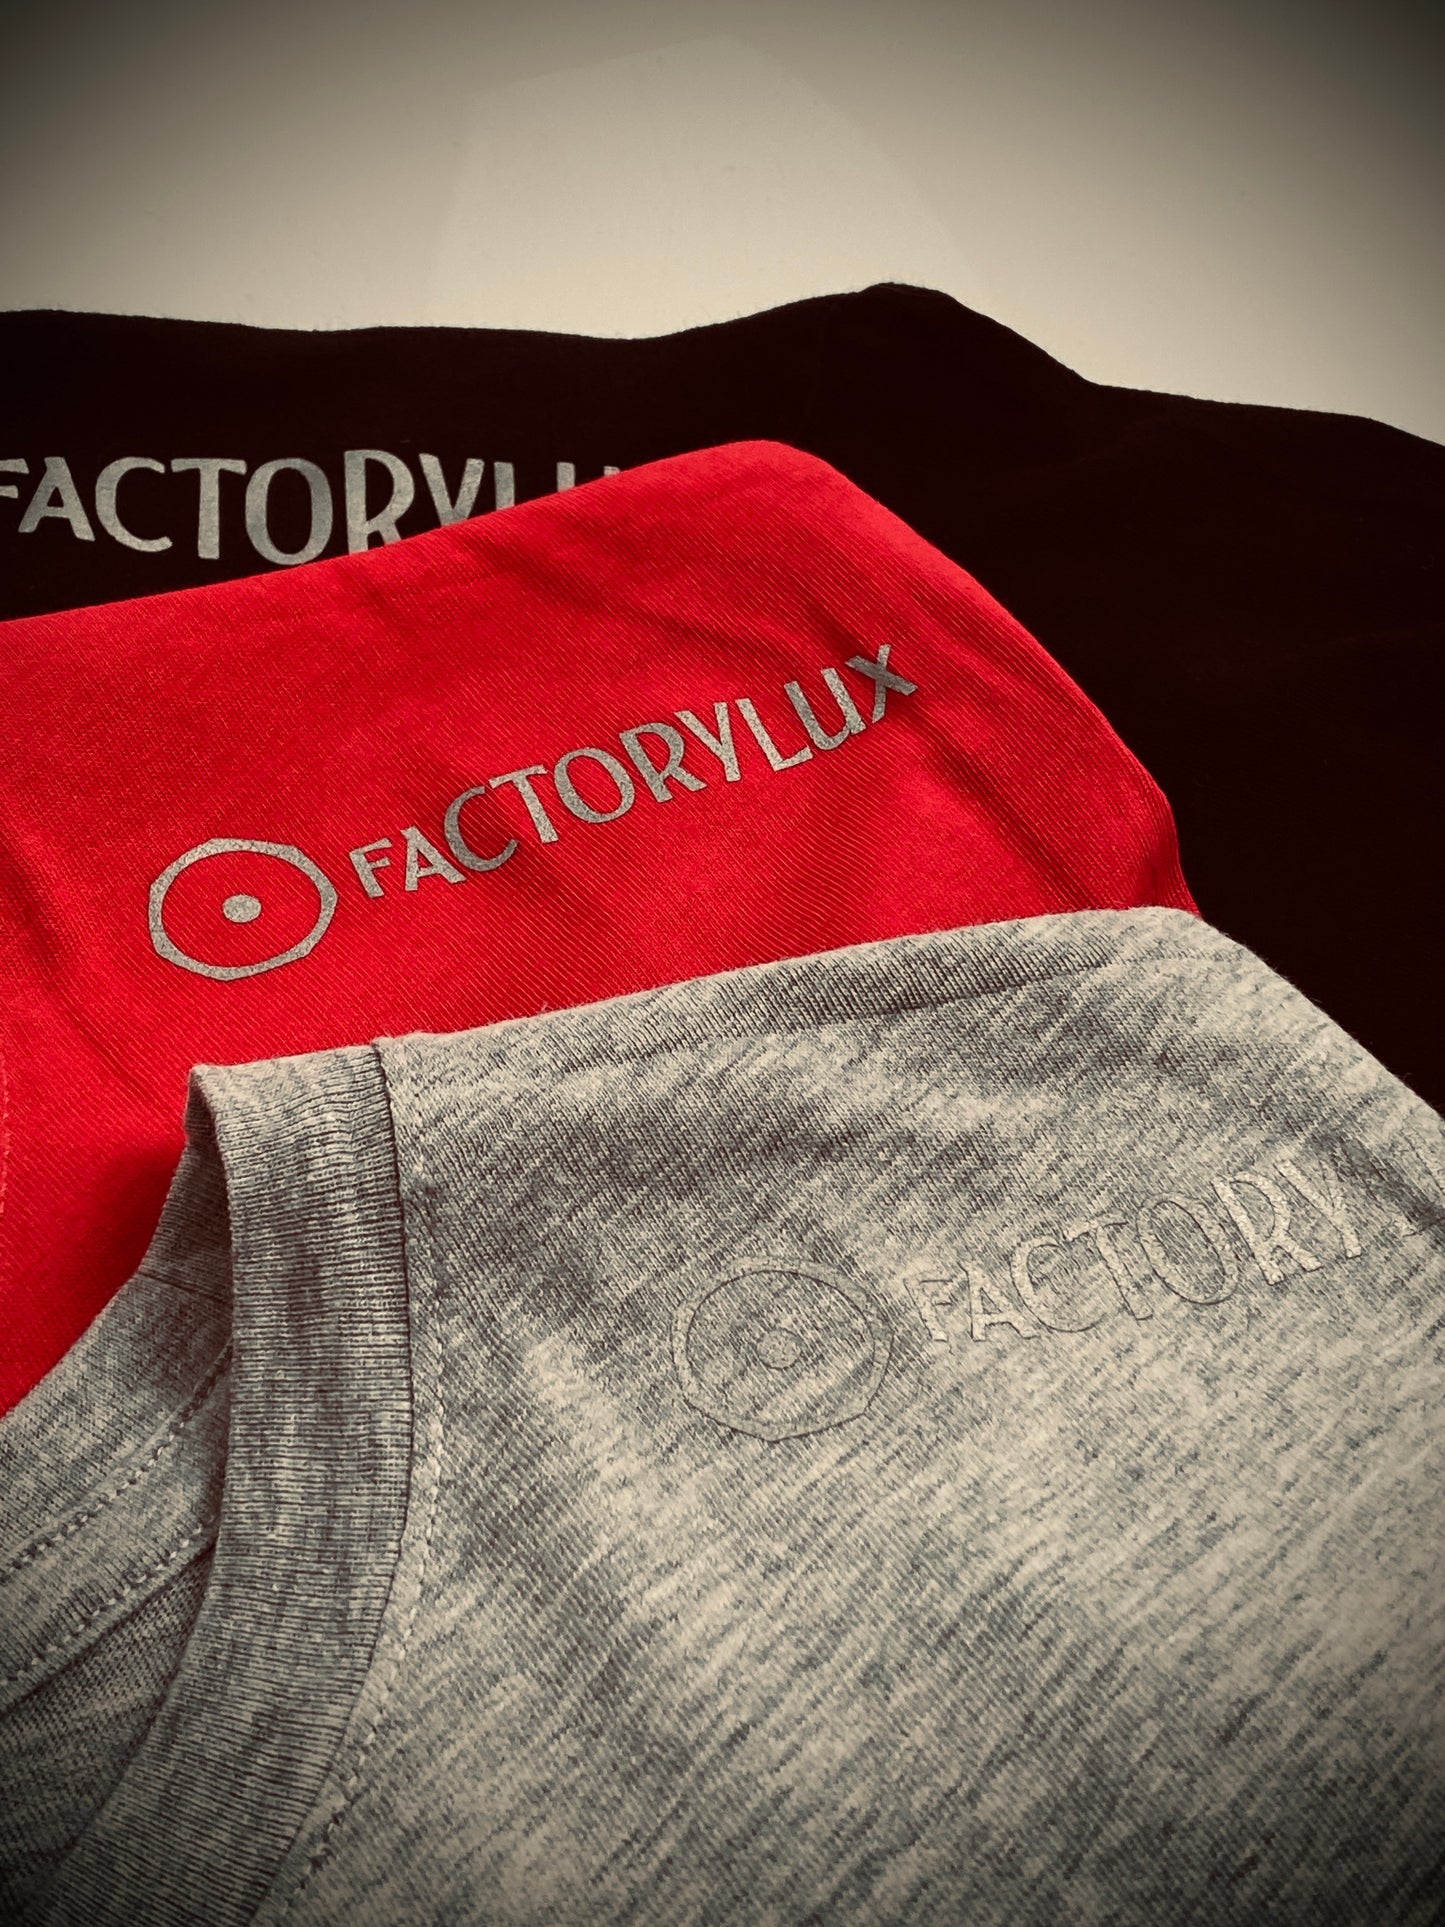 Soft 100% organic cotton T's, with Factorylux logo on left shoulder. Available in every size under the sun :-)